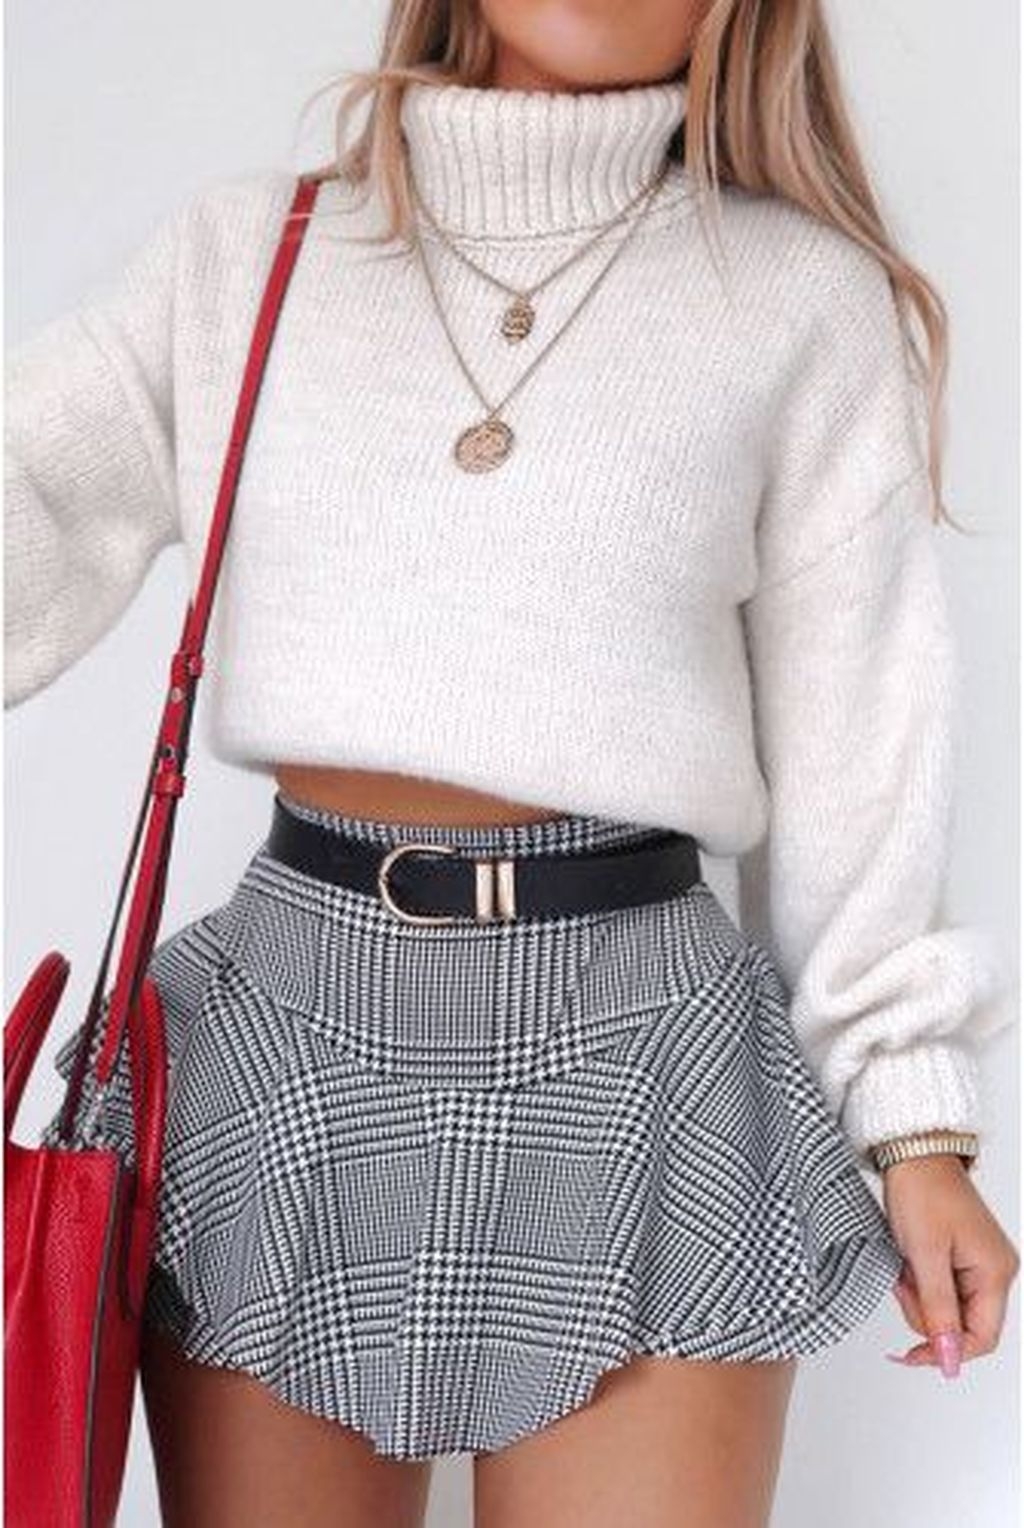 38 Charming Winter Outfits Ideas High Waisted Shorts